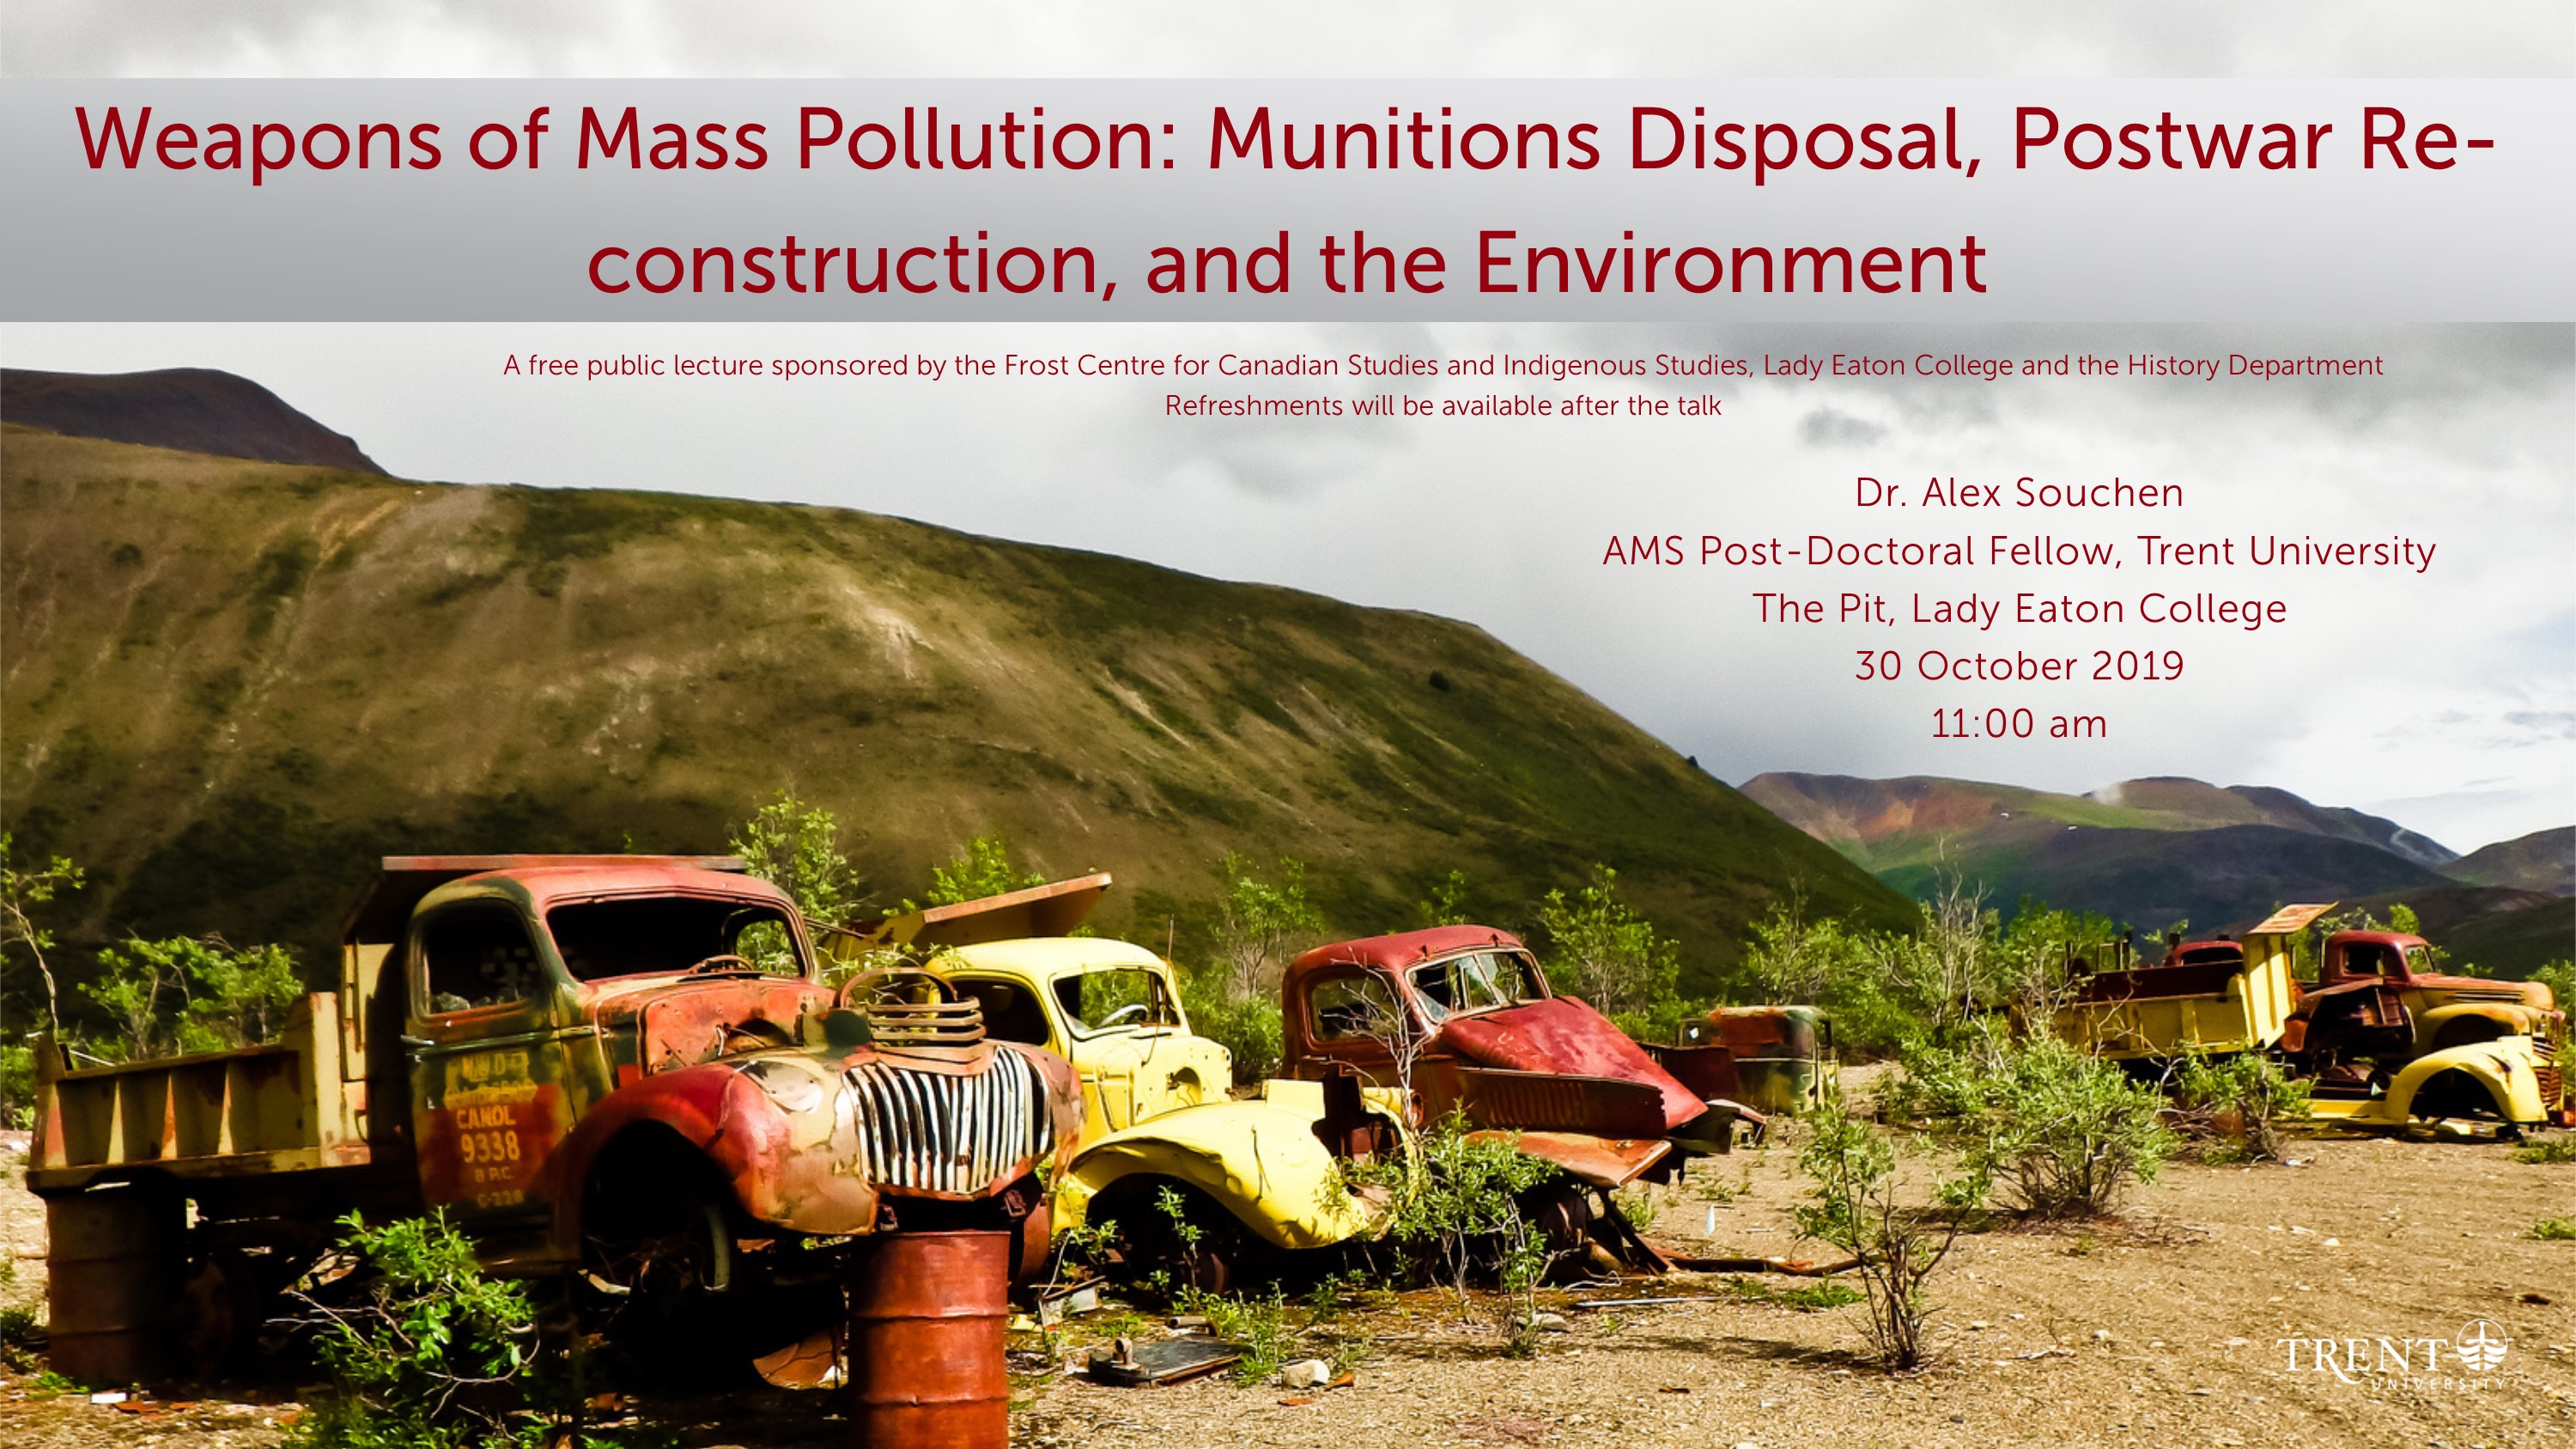 "Weapons of Mass Pollution: Munitions Disposal, Postwar Re-construction and the Environment" with Alex Souchen 30 October 2019